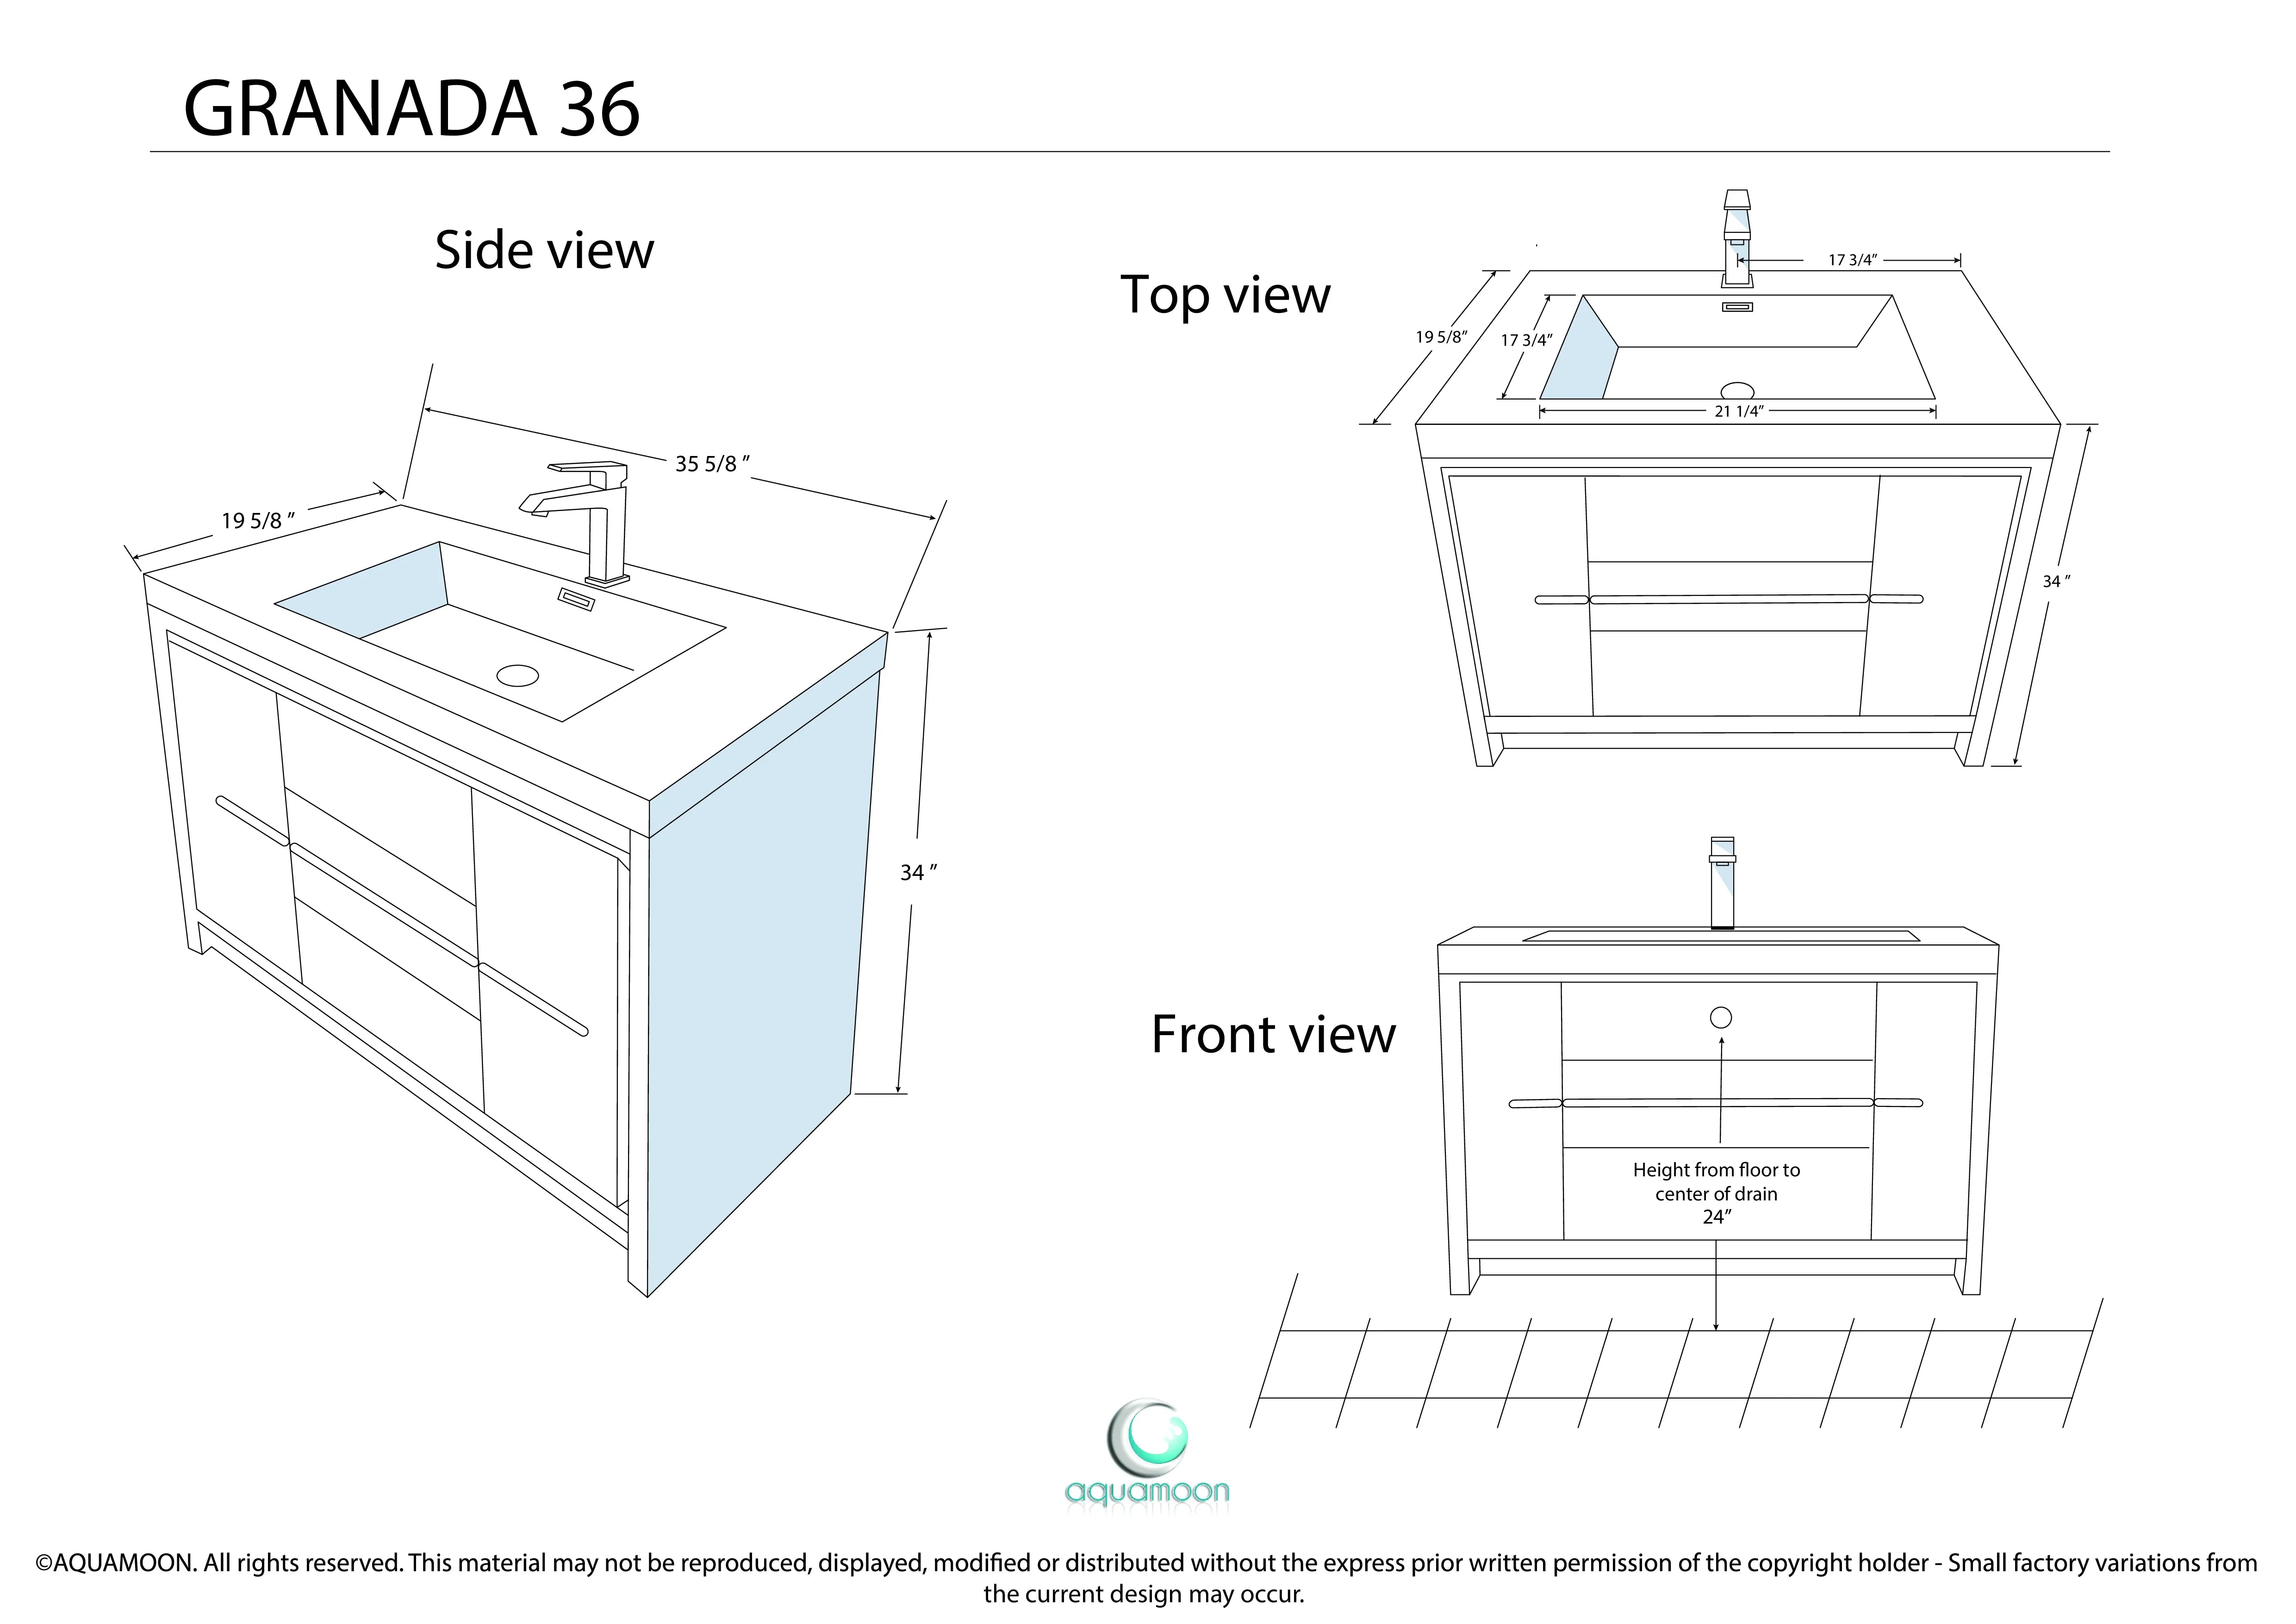 Granada 35.5 Nordic Green With Brush Gold Handle Cabinet, Square Cultured Marble Sink, Free Standing Modern Vanity Set